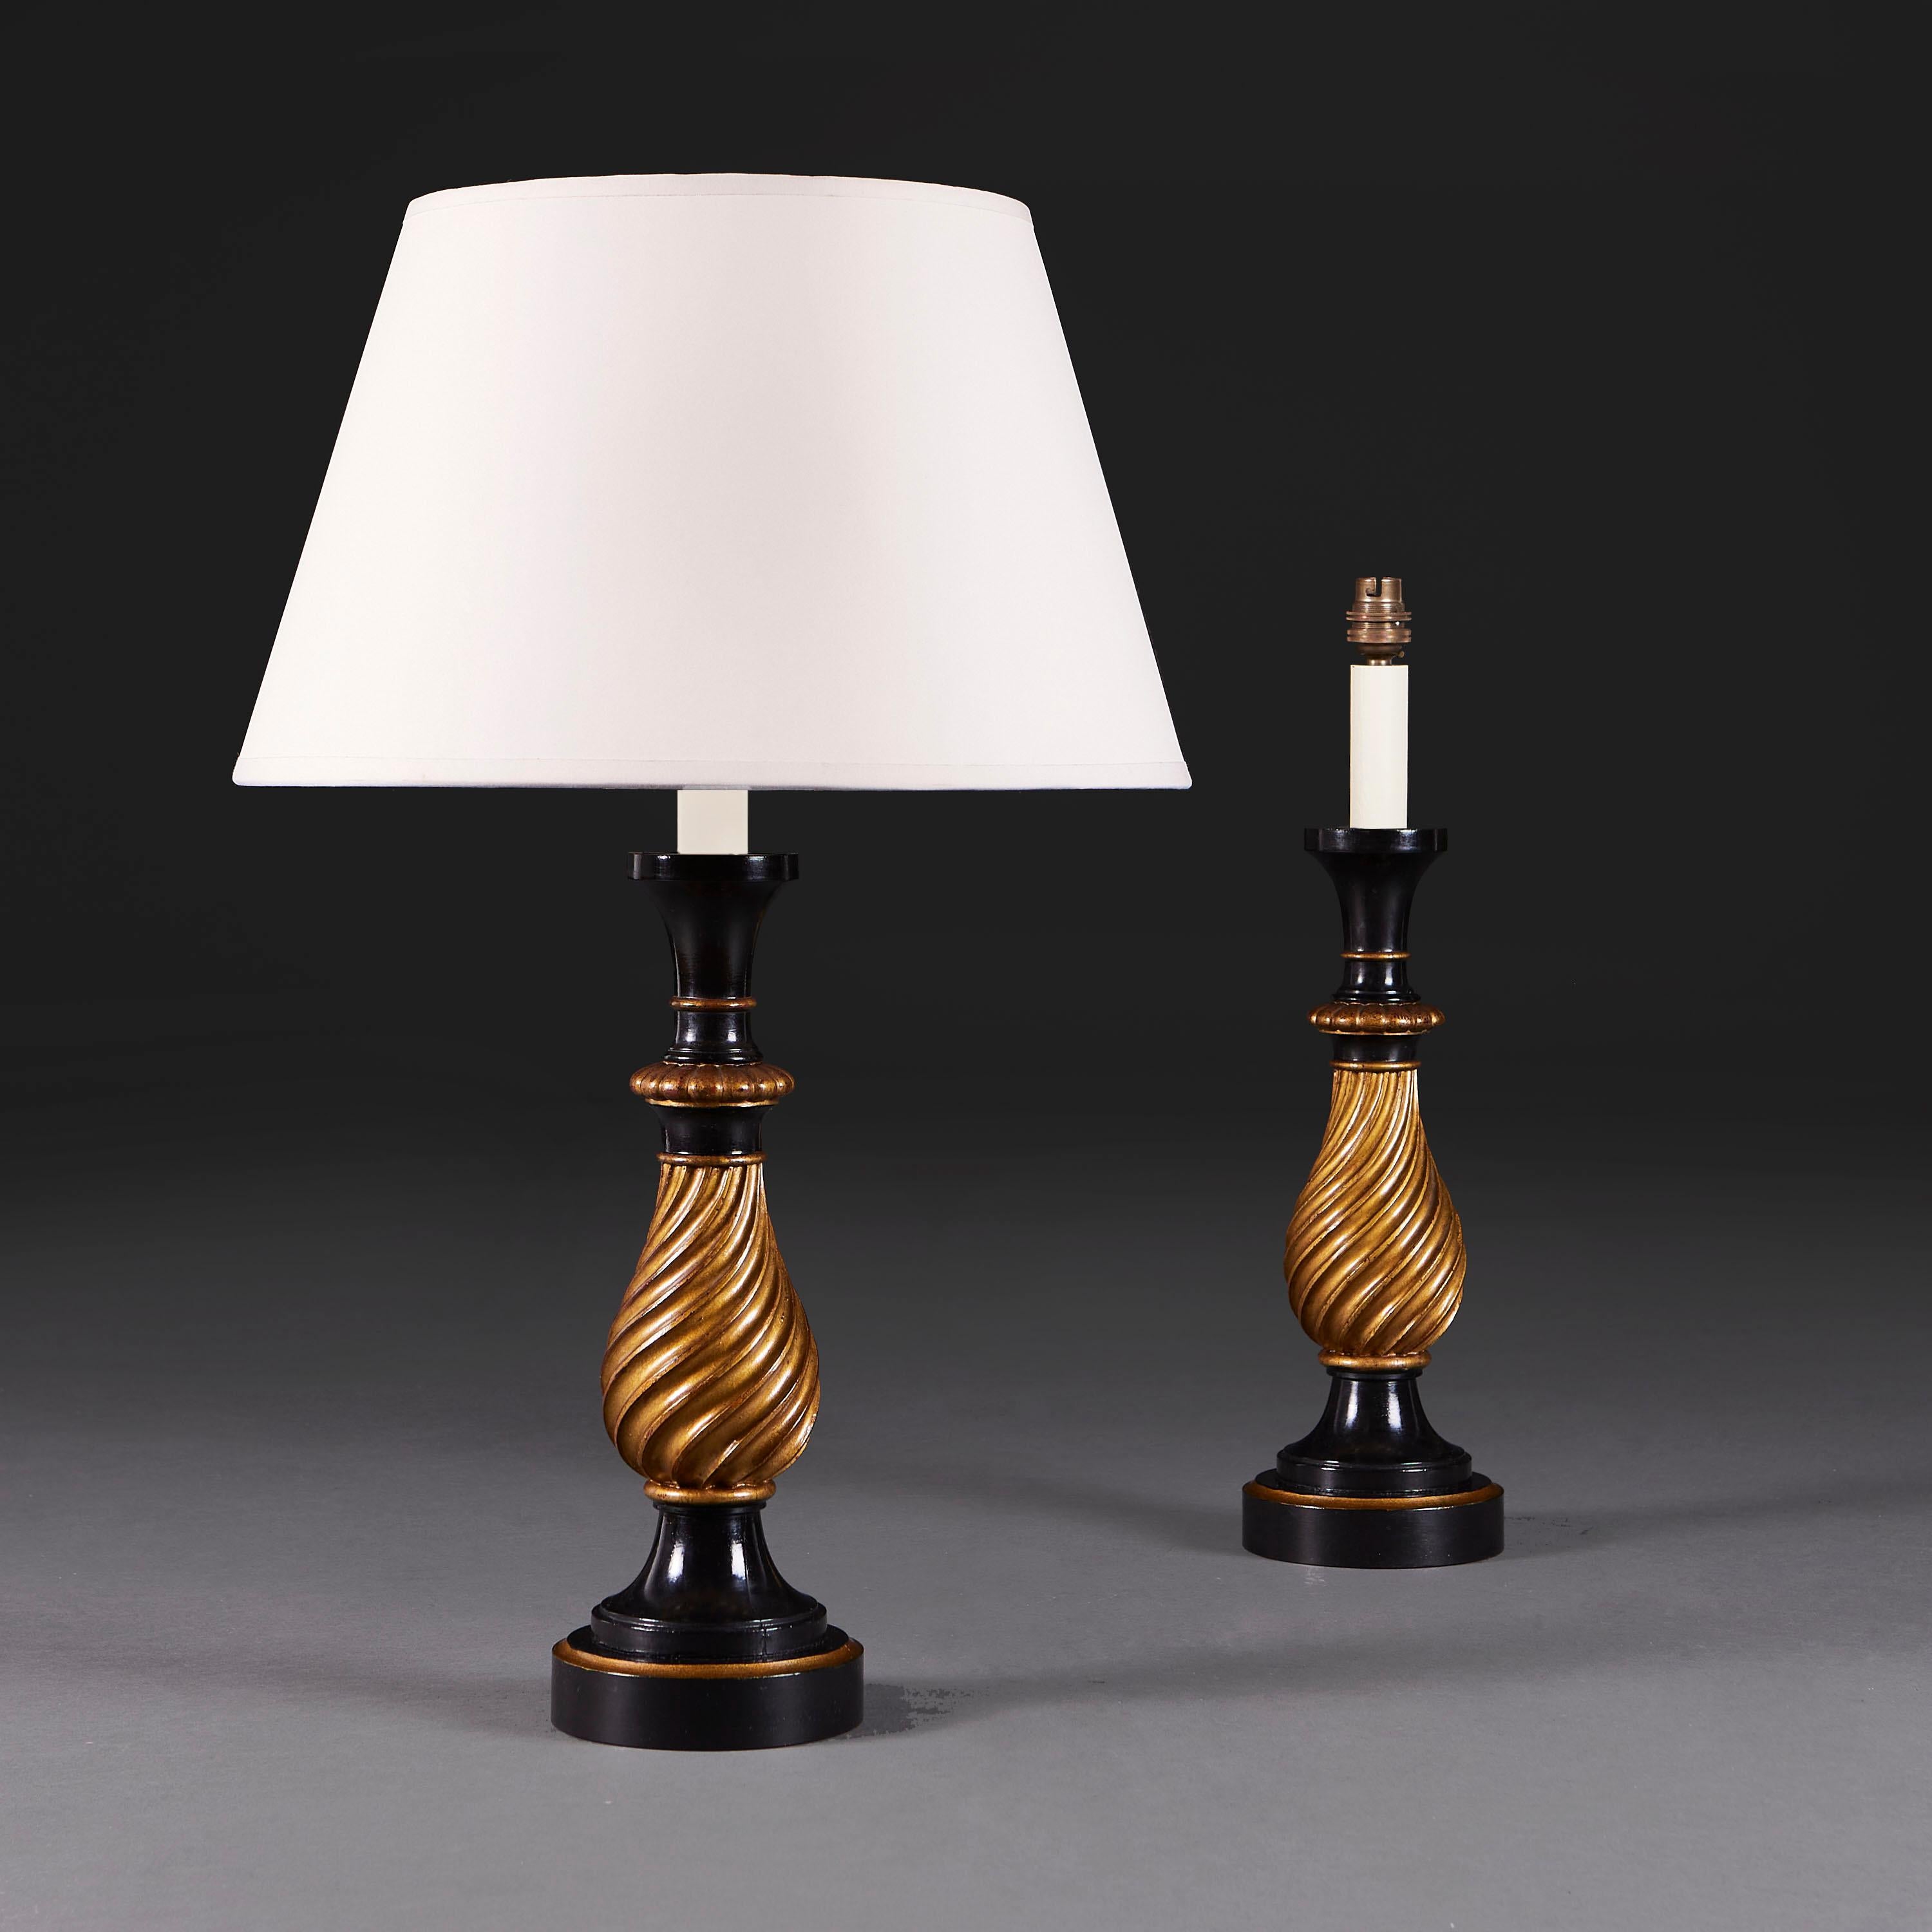 England, circa 1910

A pair of Edwardian spiral turned baluster lamps with gilded and ebonised sections all supported on a circular plinth base, now converted as lamps.

Height 40.50cm
Diameter of base 12.00cm

Please note: This is currently wired